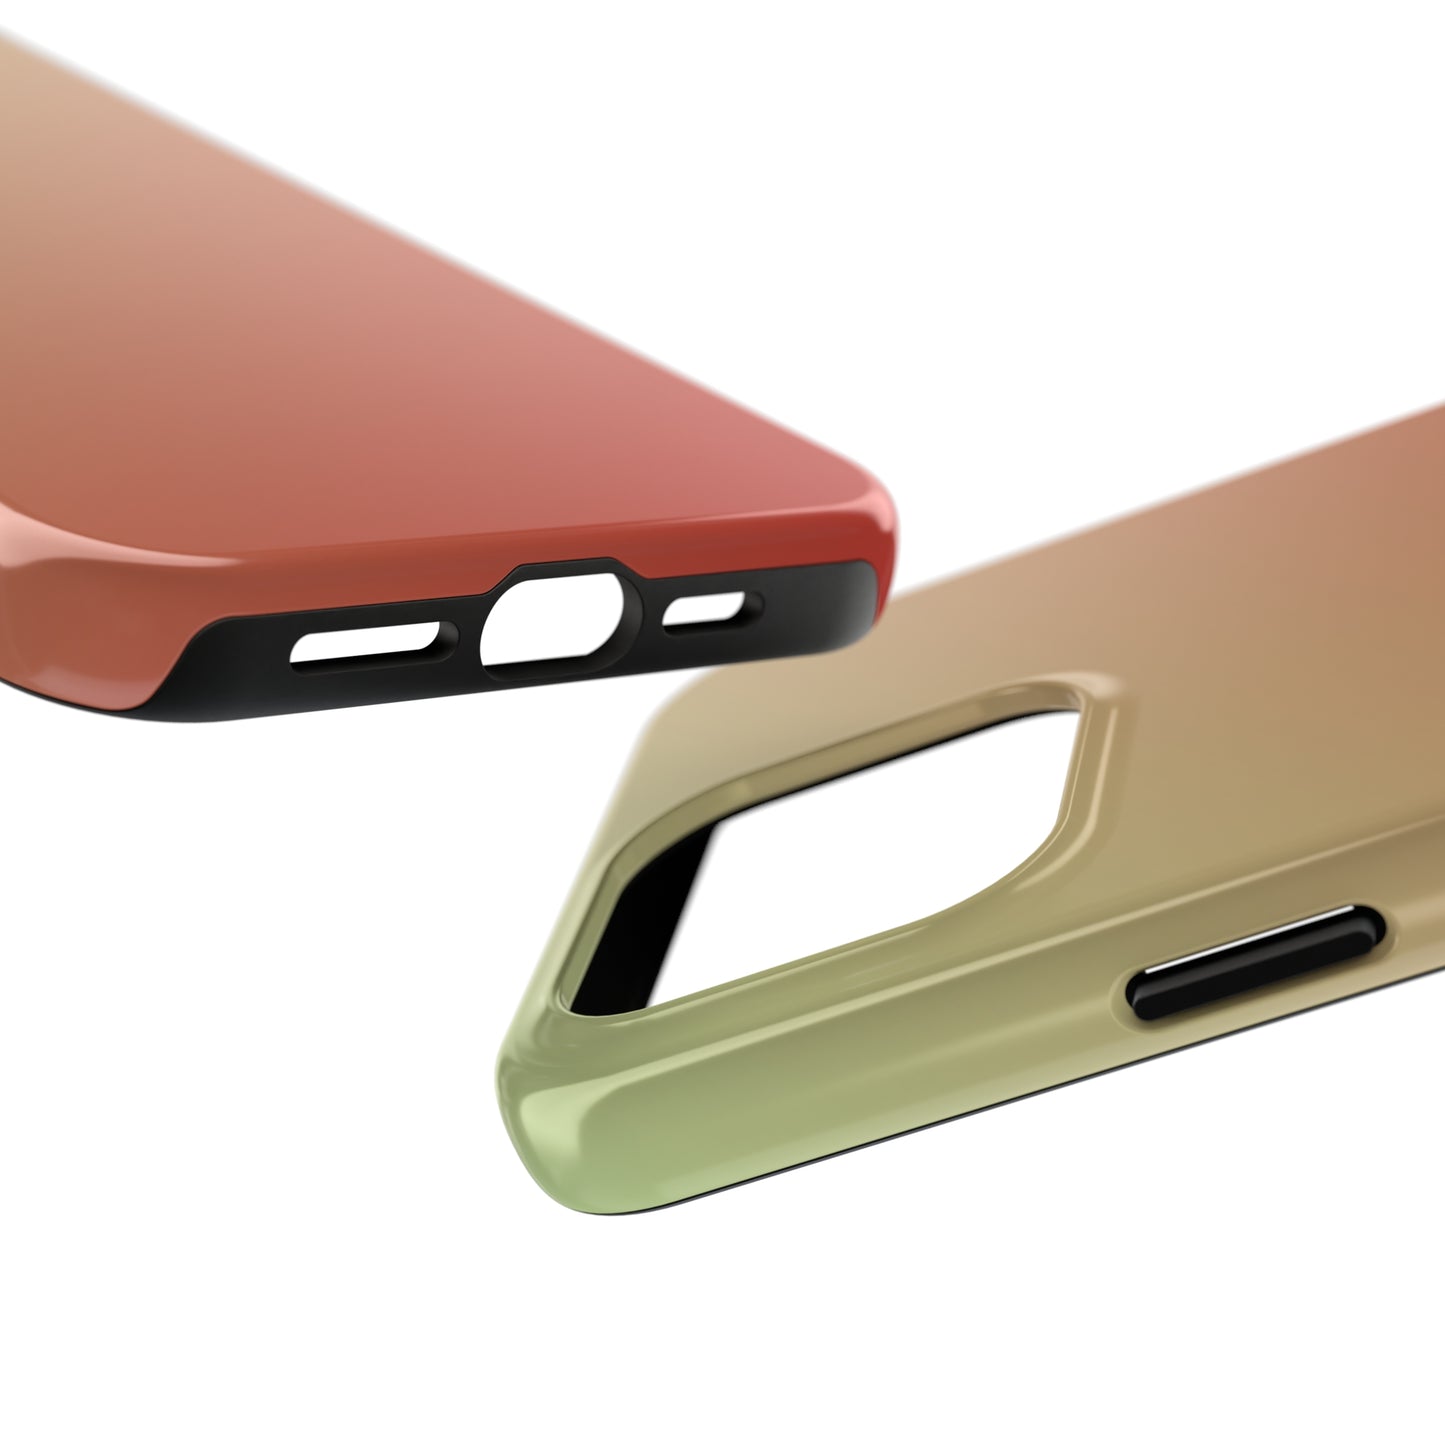 Gradient Red Green Tough Phone Cases